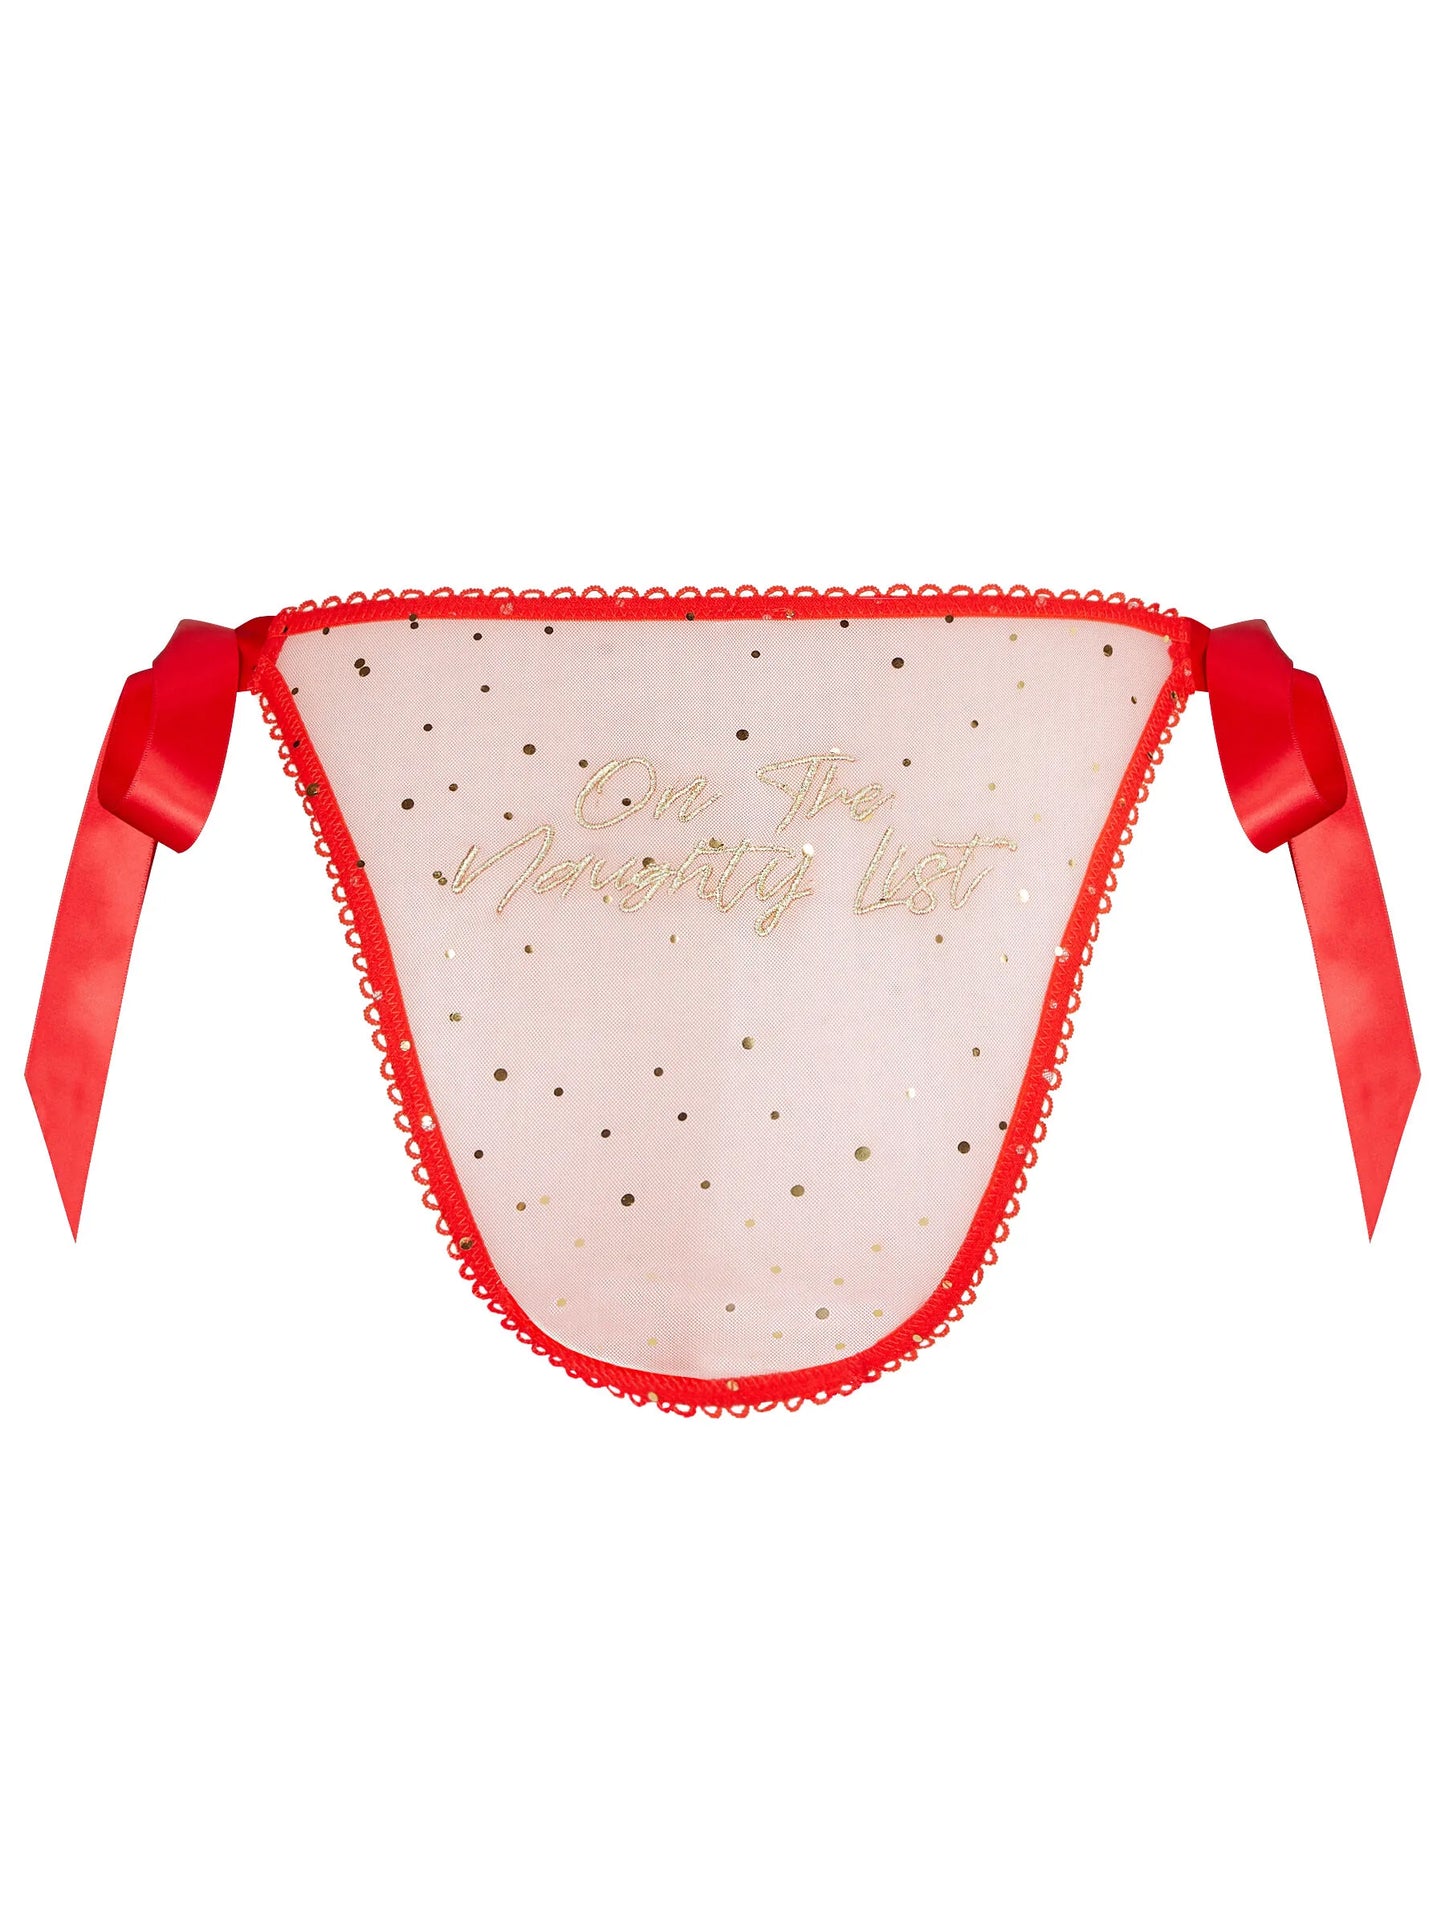 Naughty List Knicker From Ann Summers, Image 04